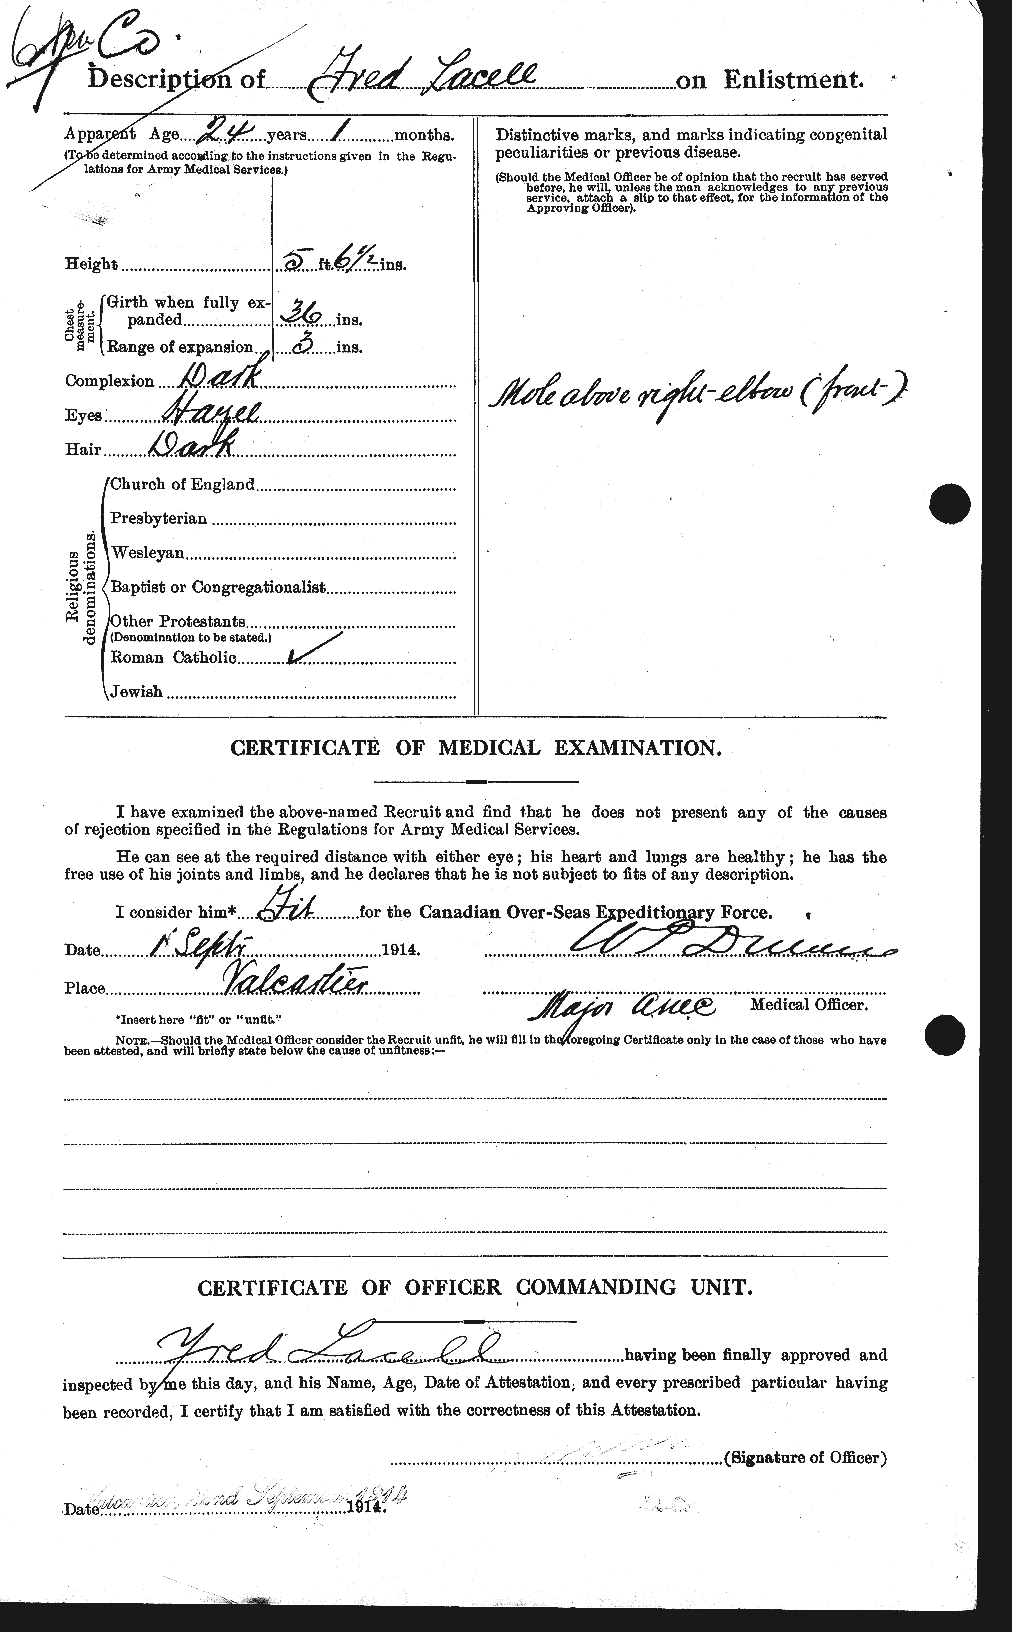 Personnel Records of the First World War - CEF 444433b